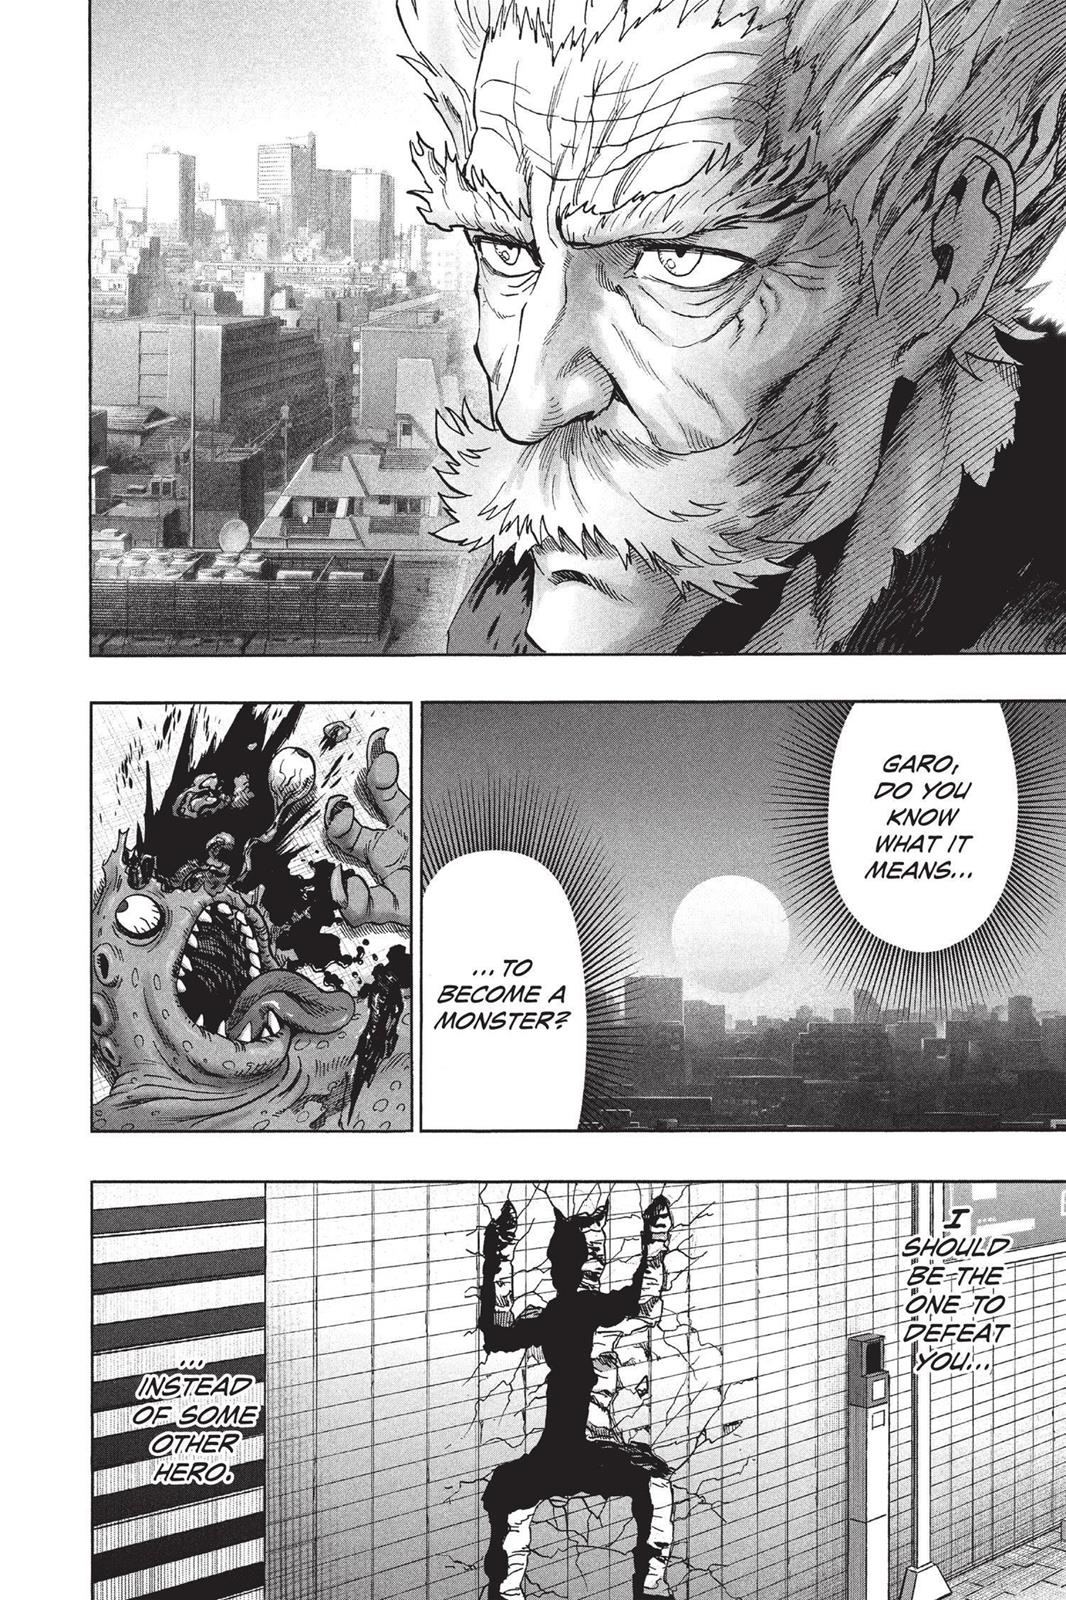 One-Punch Man, Punch 78 image 38